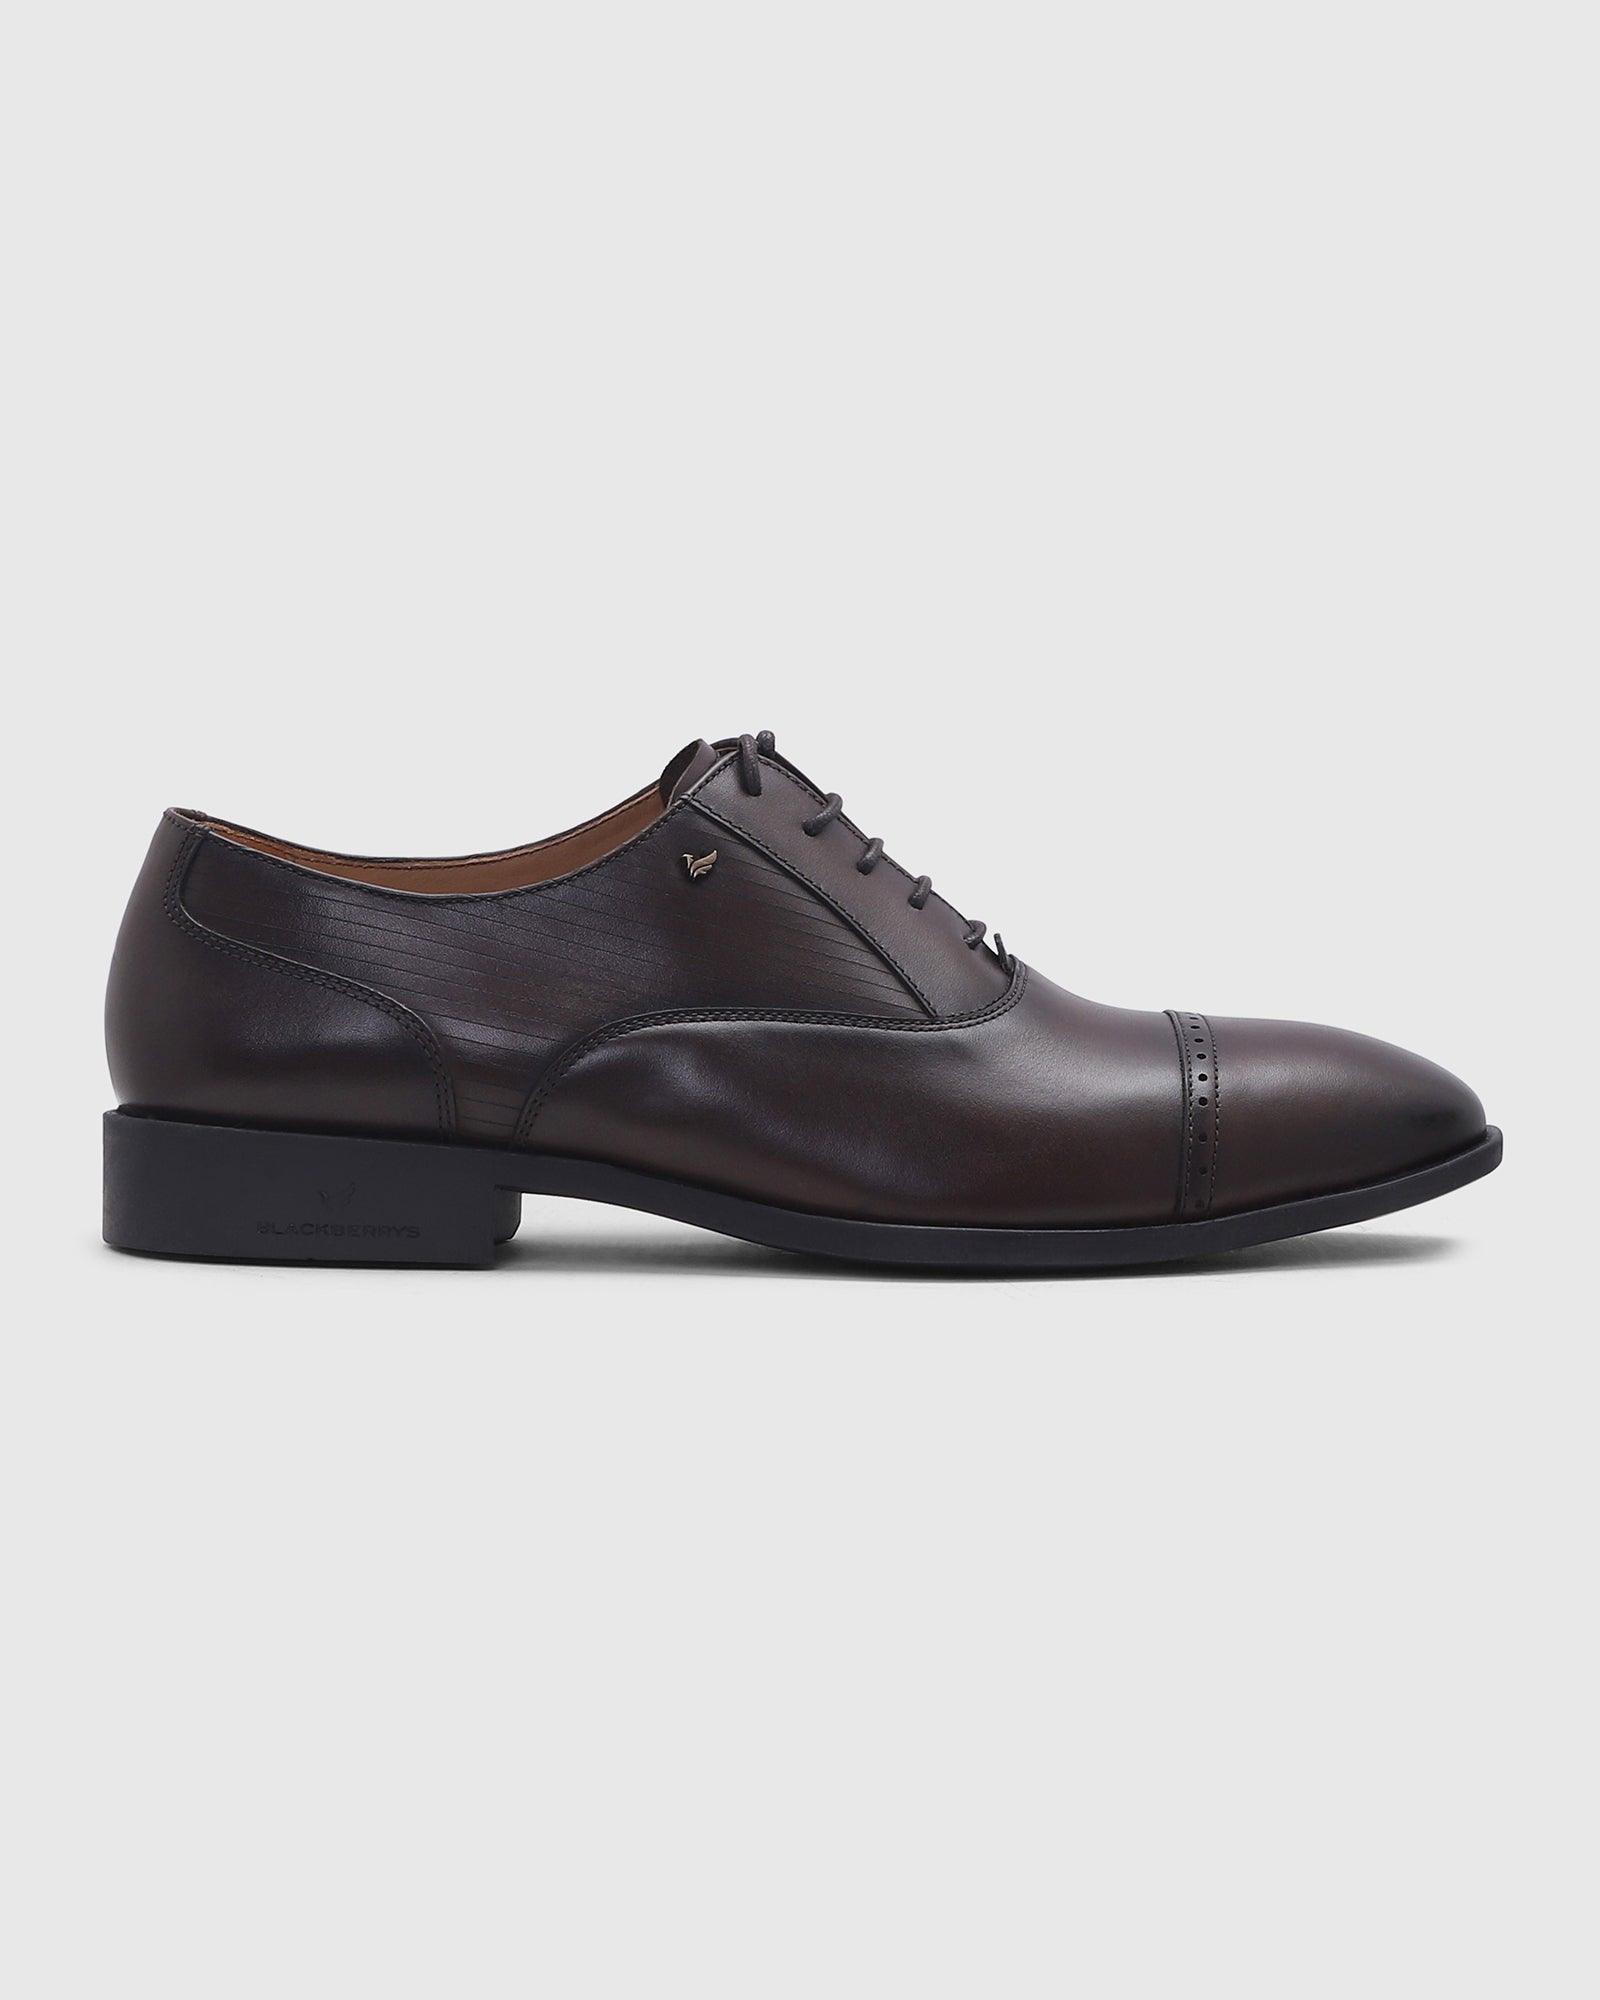 Leather Formal Brown Solid Oxford Shoes - Prebolt